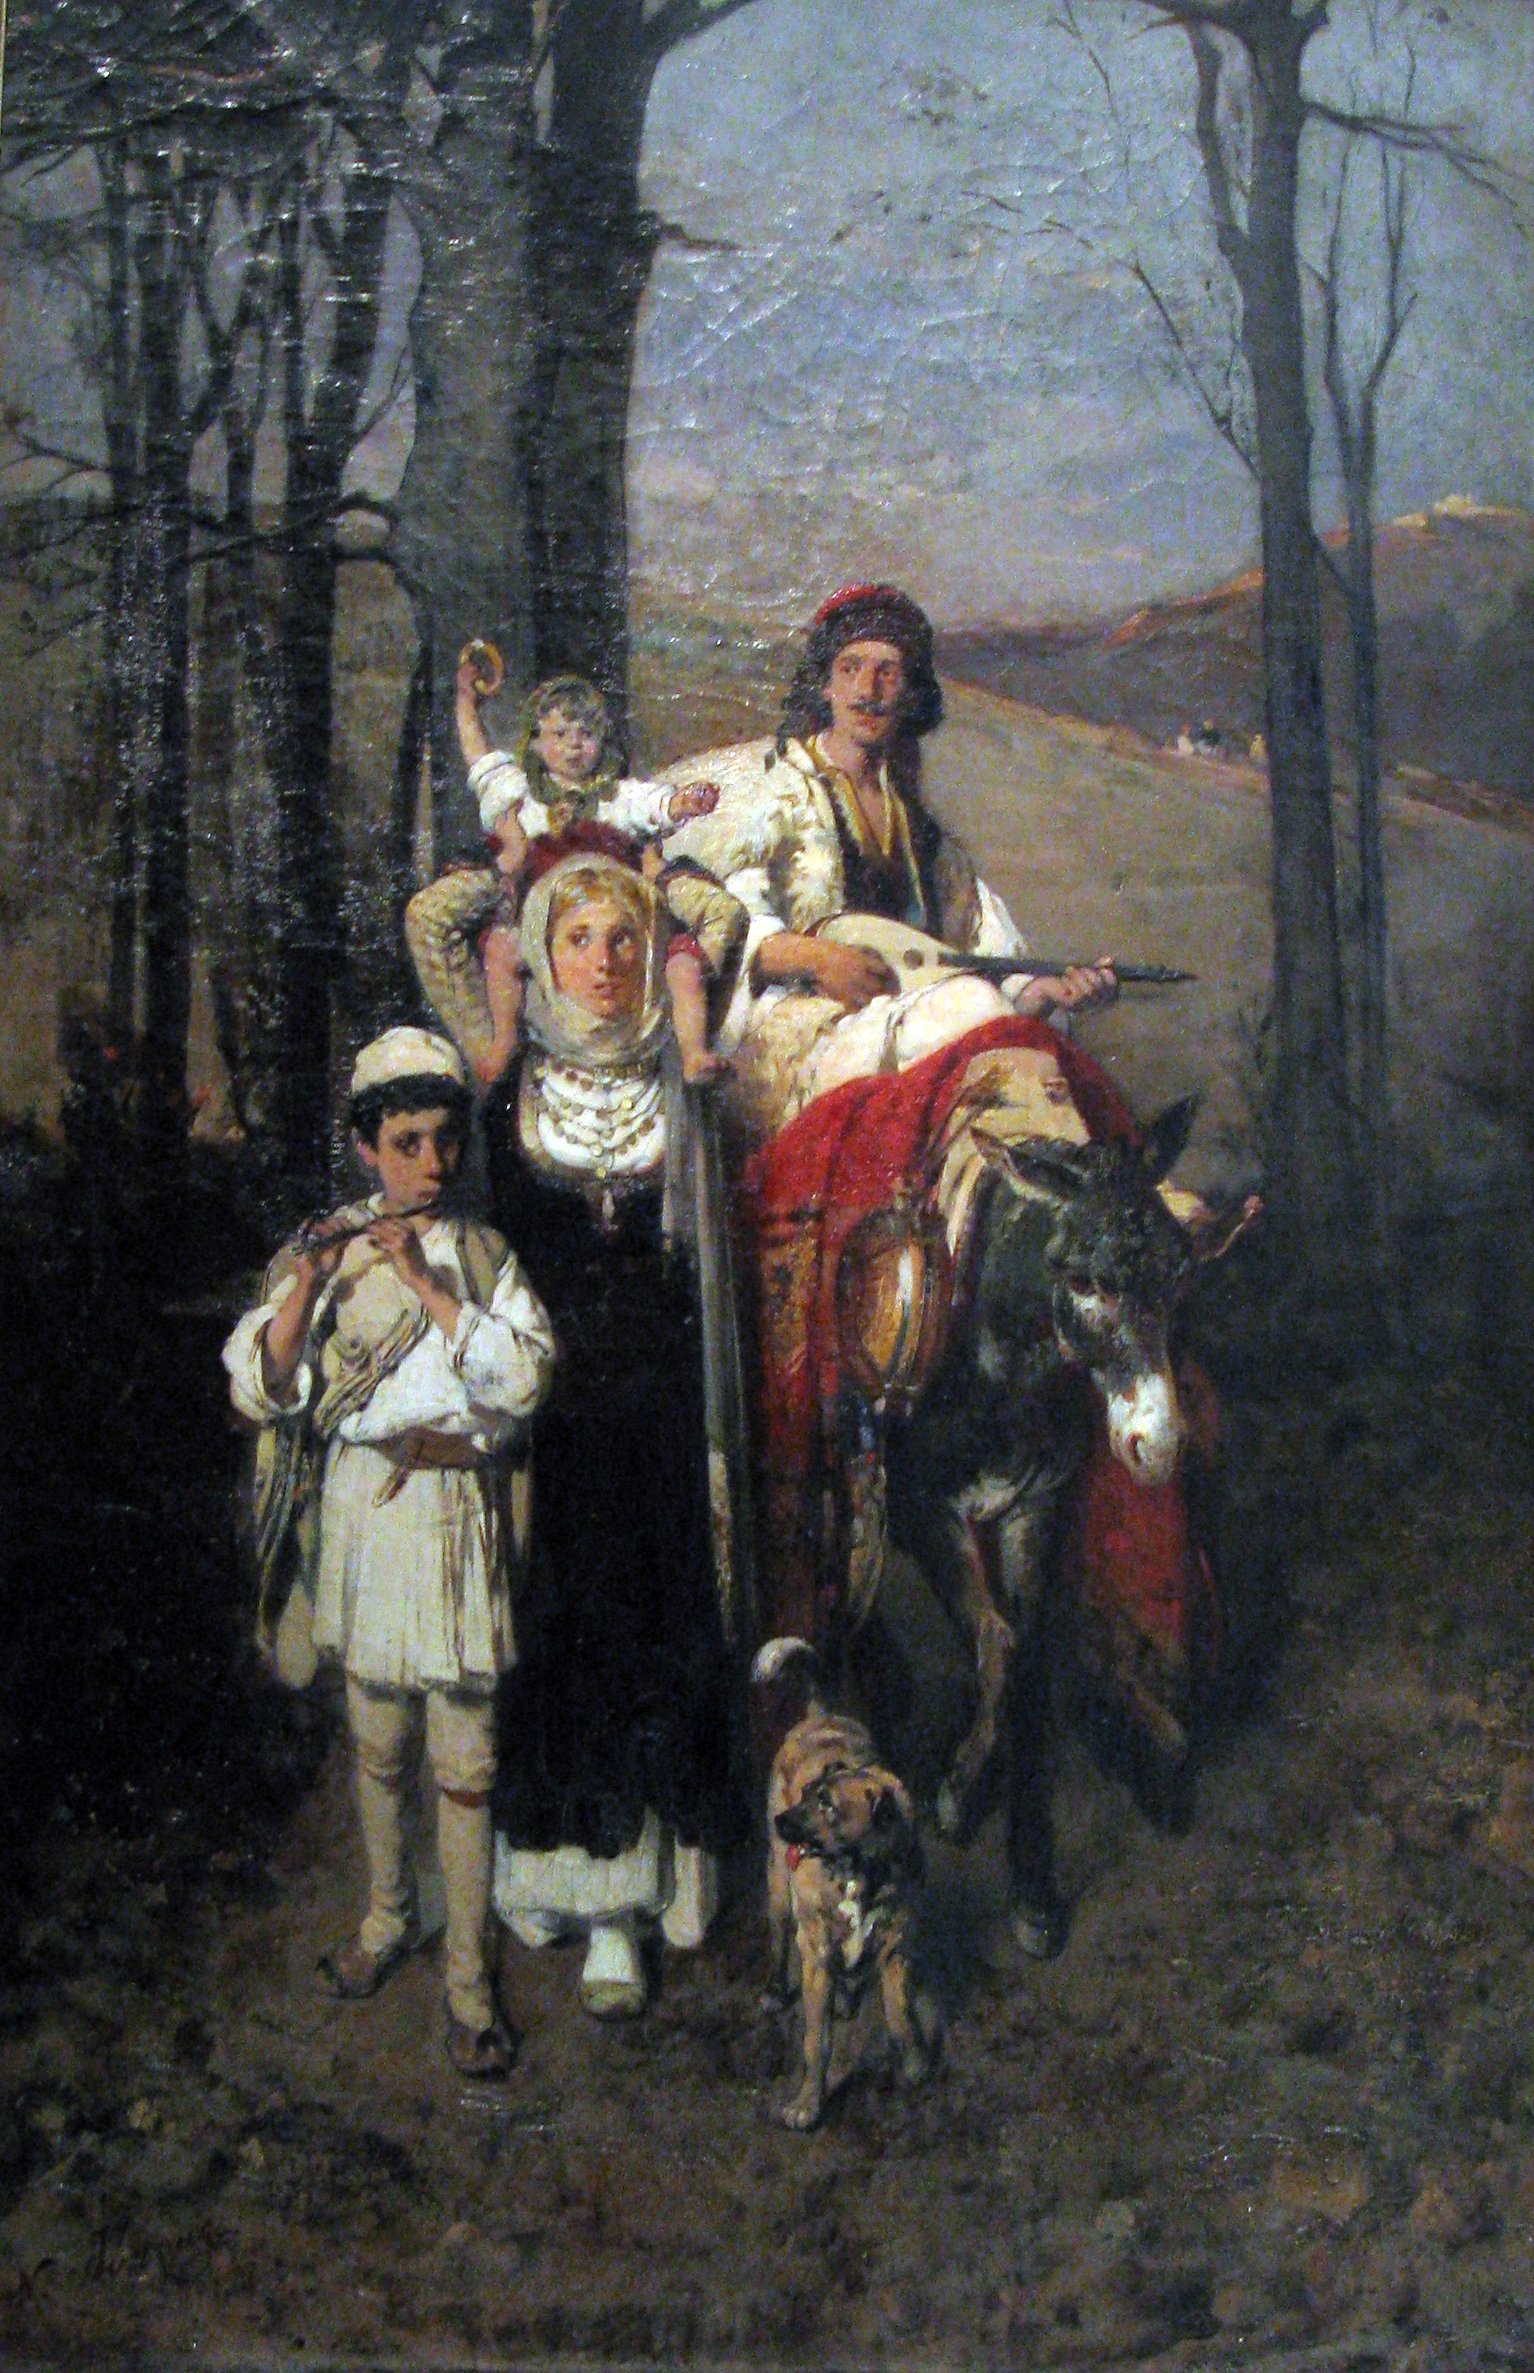 a painting of two women and two children sitting on a donkey